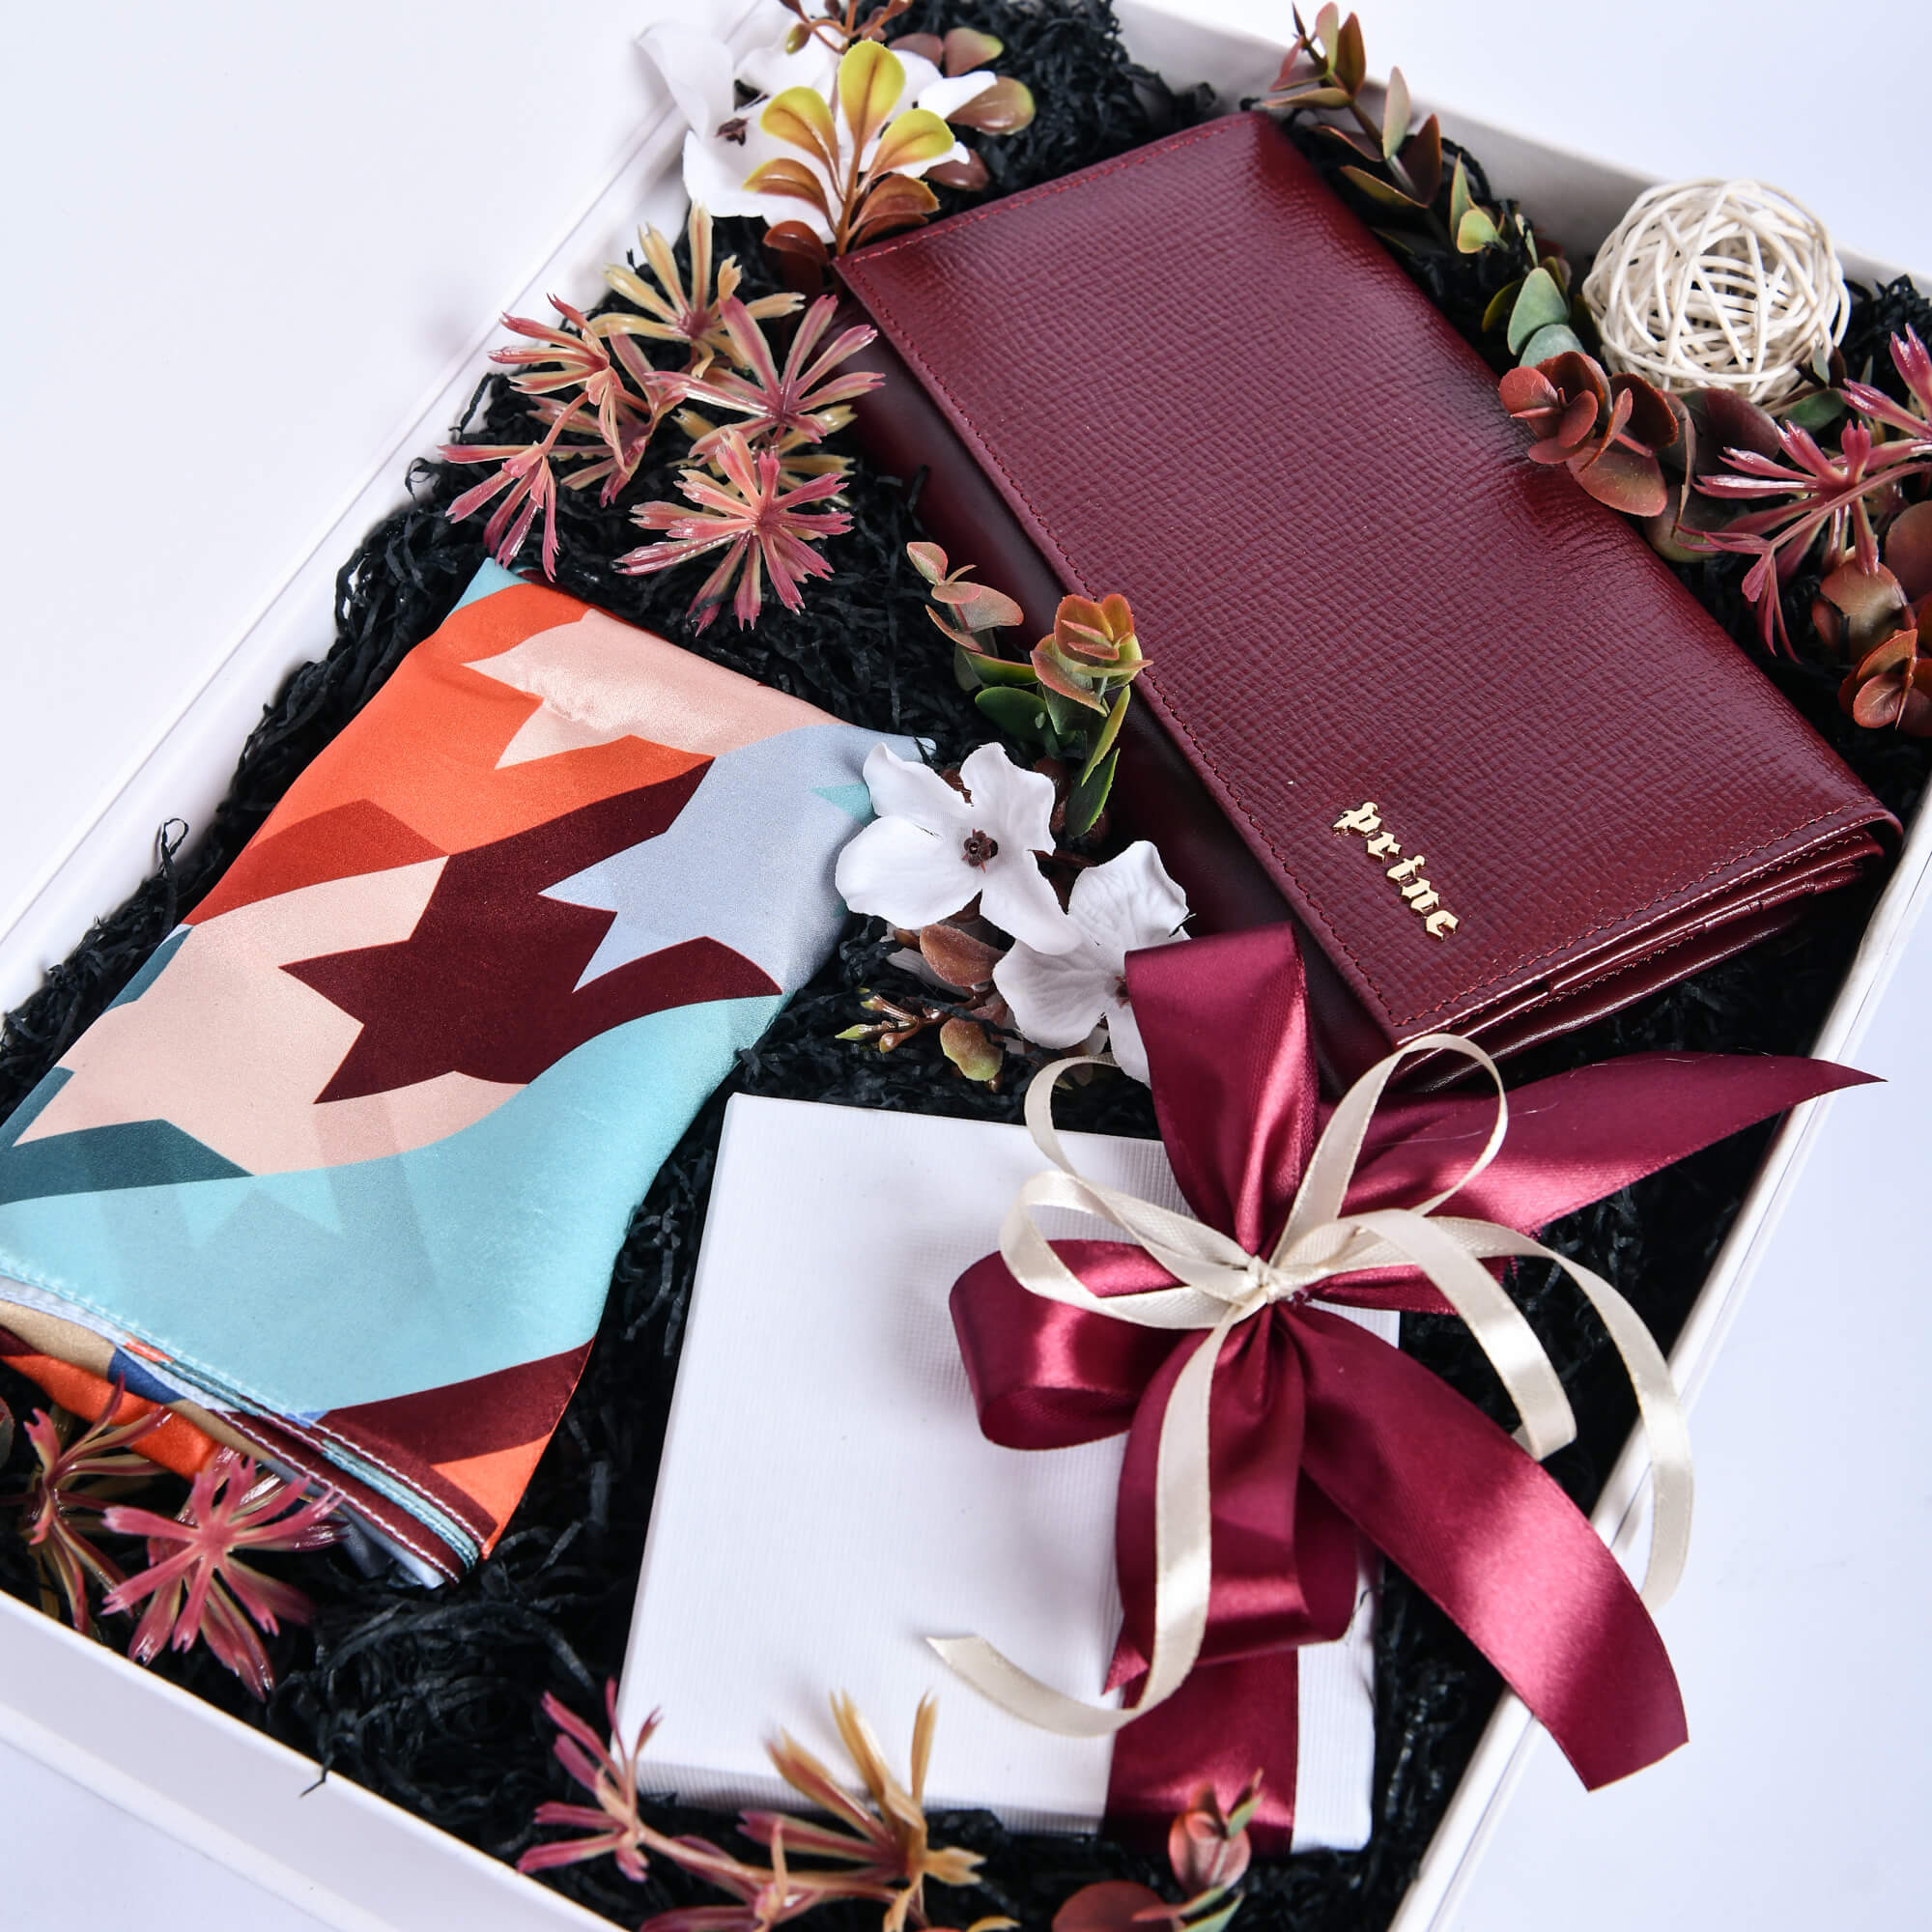 Korpo premimum 2 - with a leather women's wallet, a handmade silk scarf and Alicia dragees in a white wooden box - flower delivery - Cvećara Provansa Dekor Belgrade